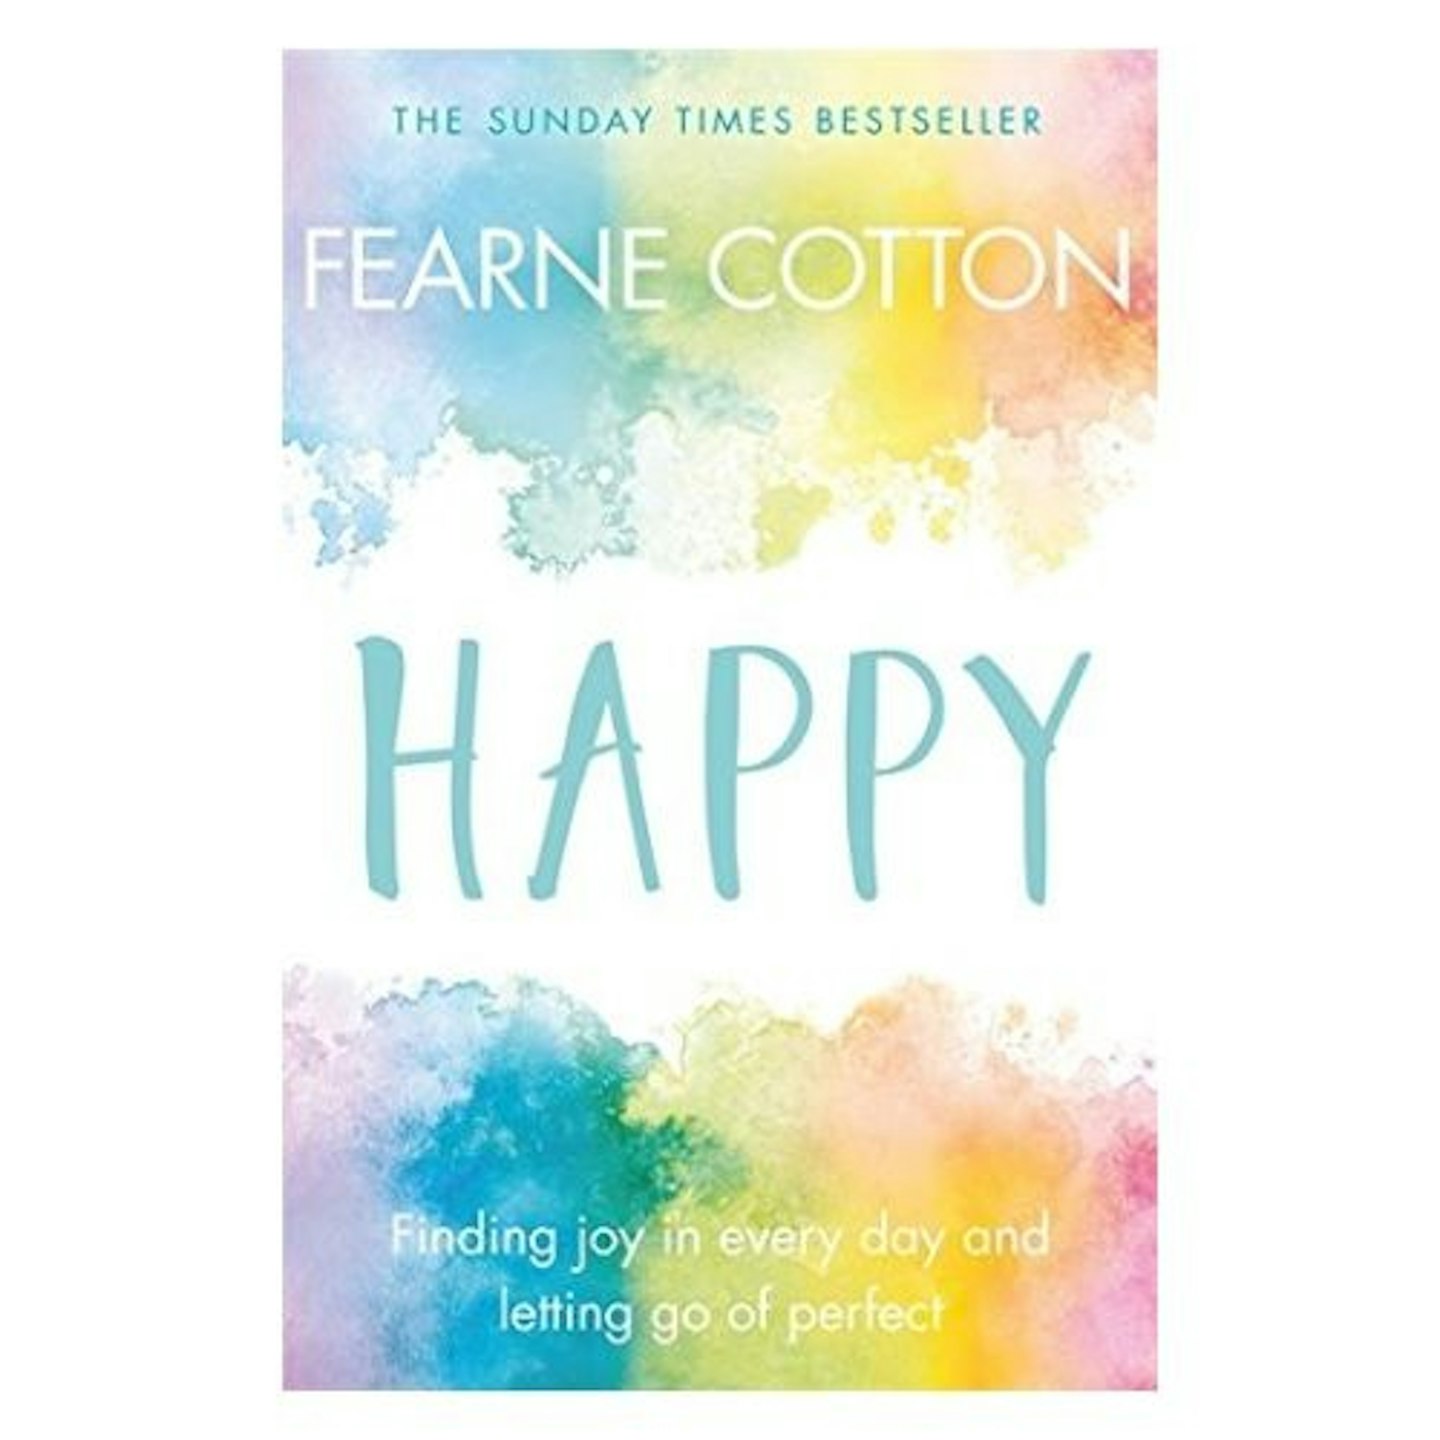 Happy: Finding joy in every day and letting go of perfect by Fearne Cotton